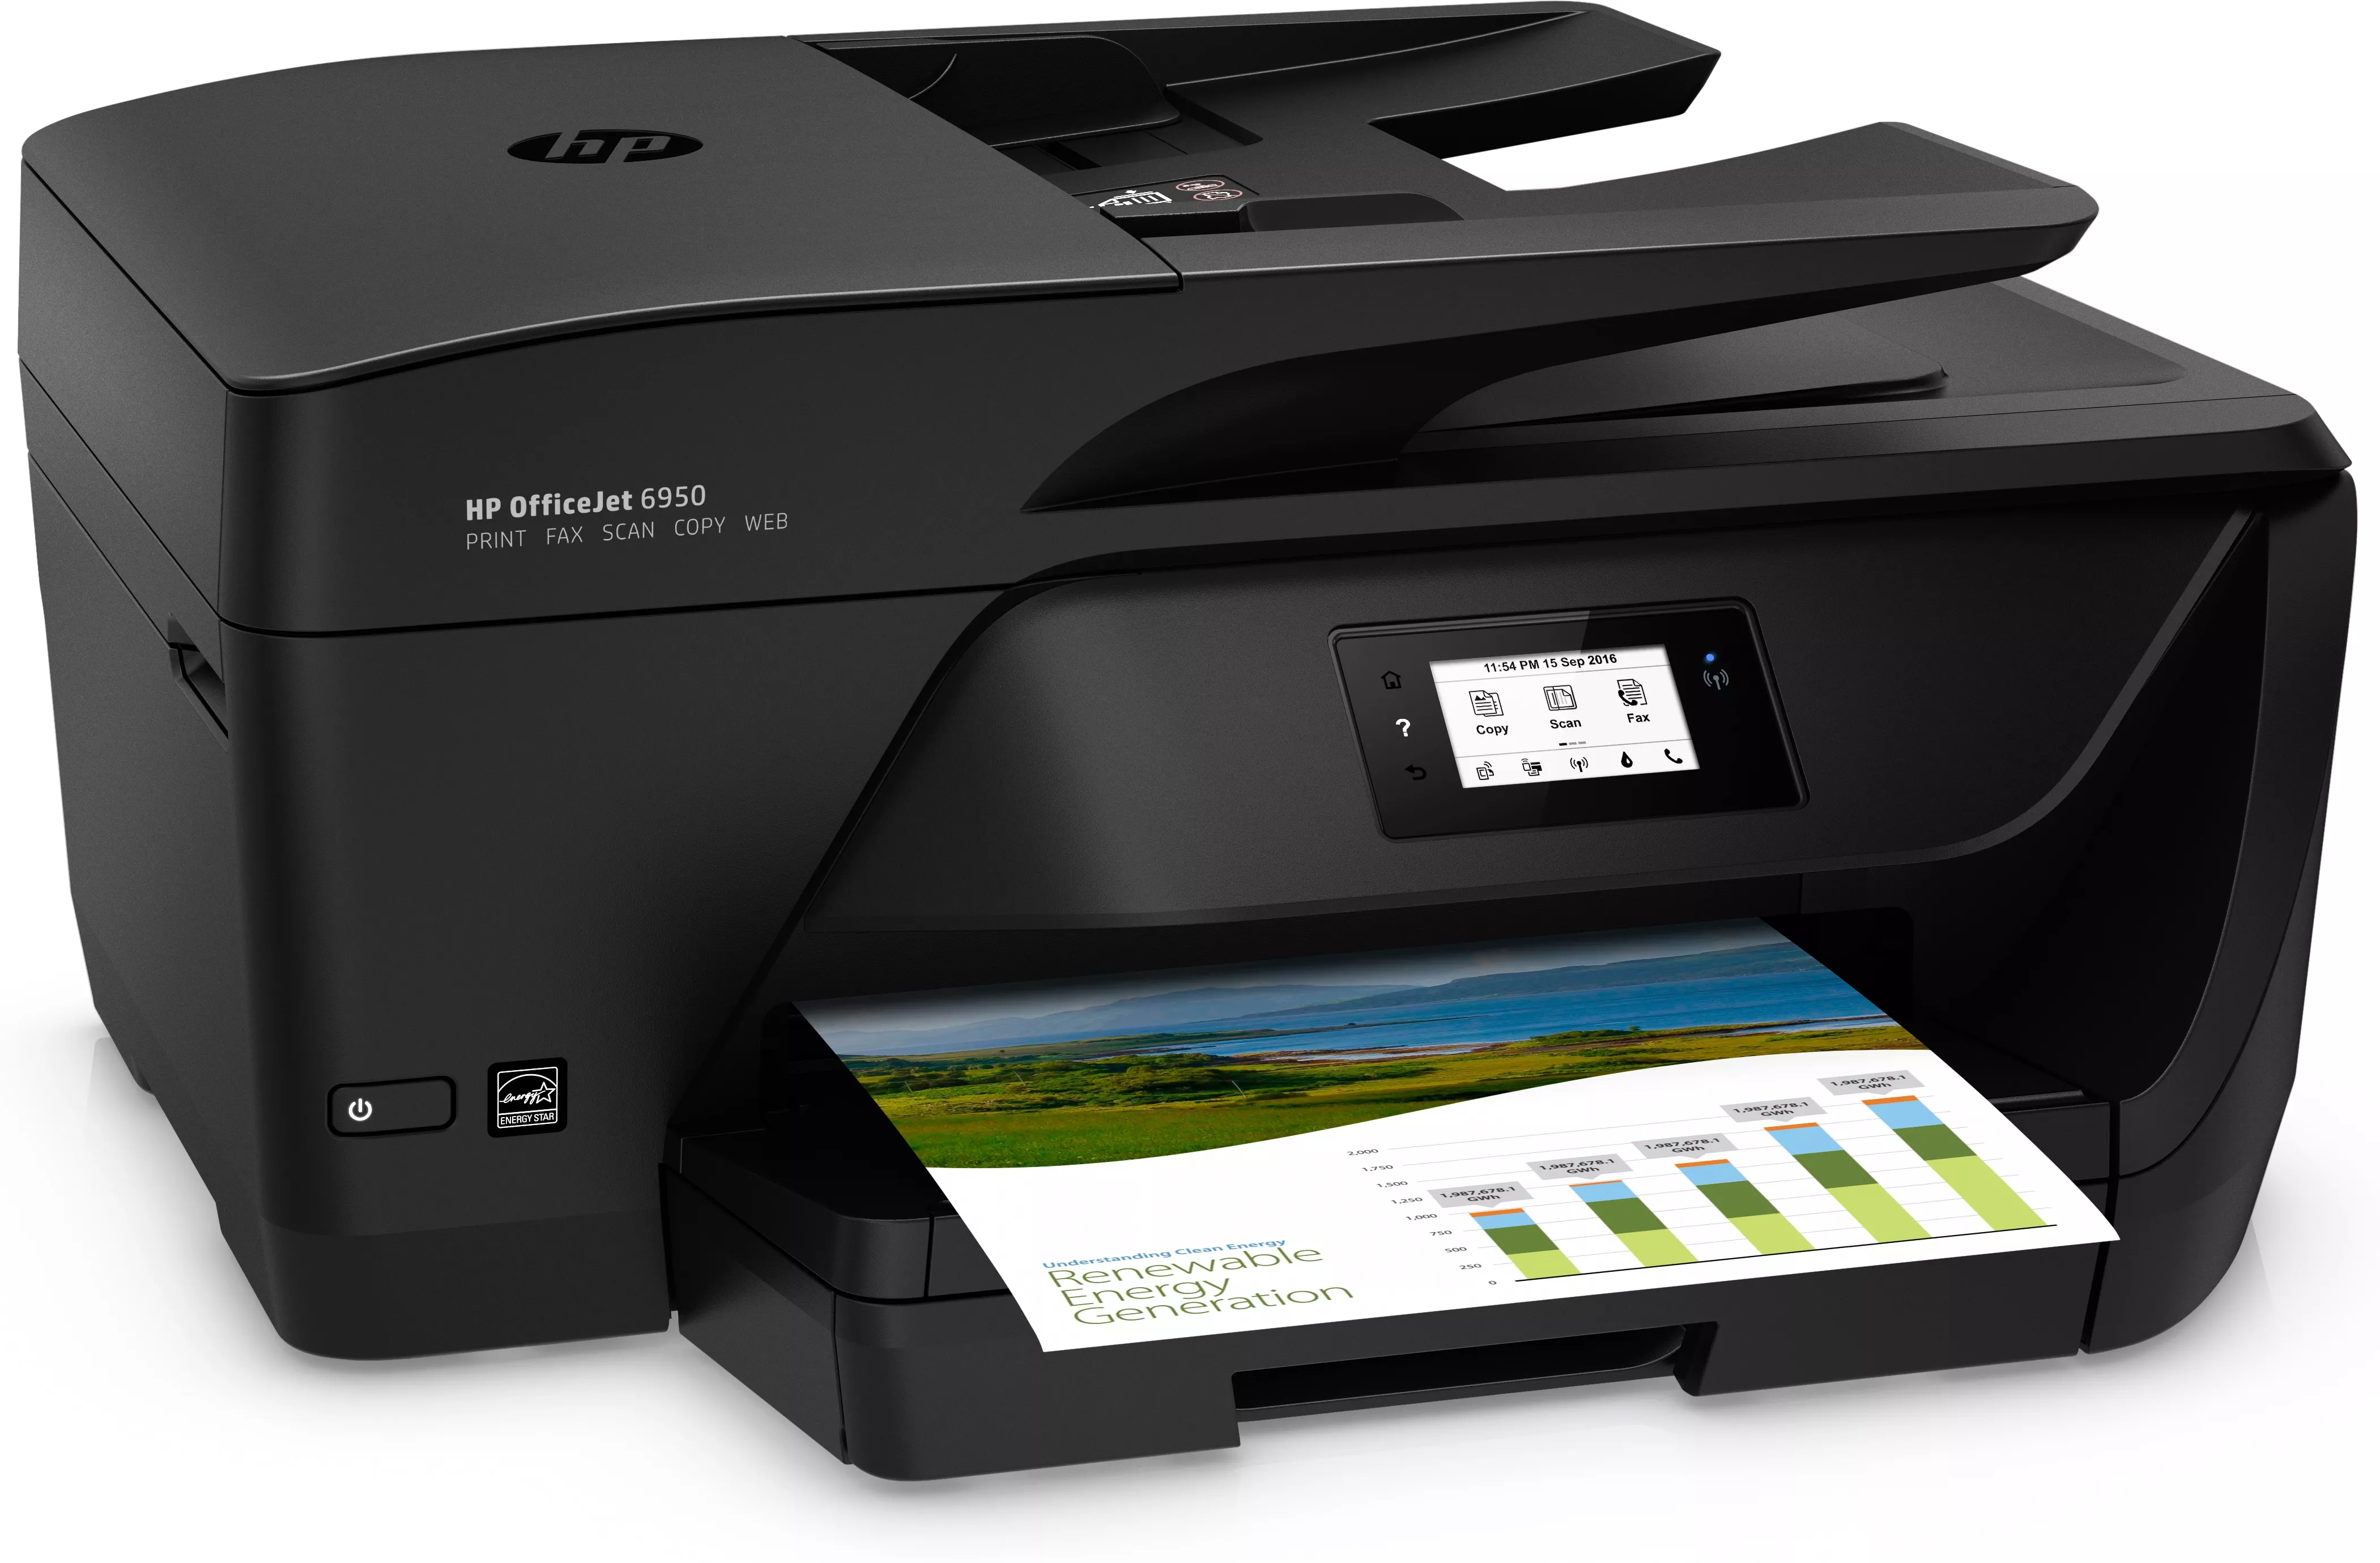 Achat HP OfficeJet 6950 e-All-in-One Printer sur hello RSE - visuel 3